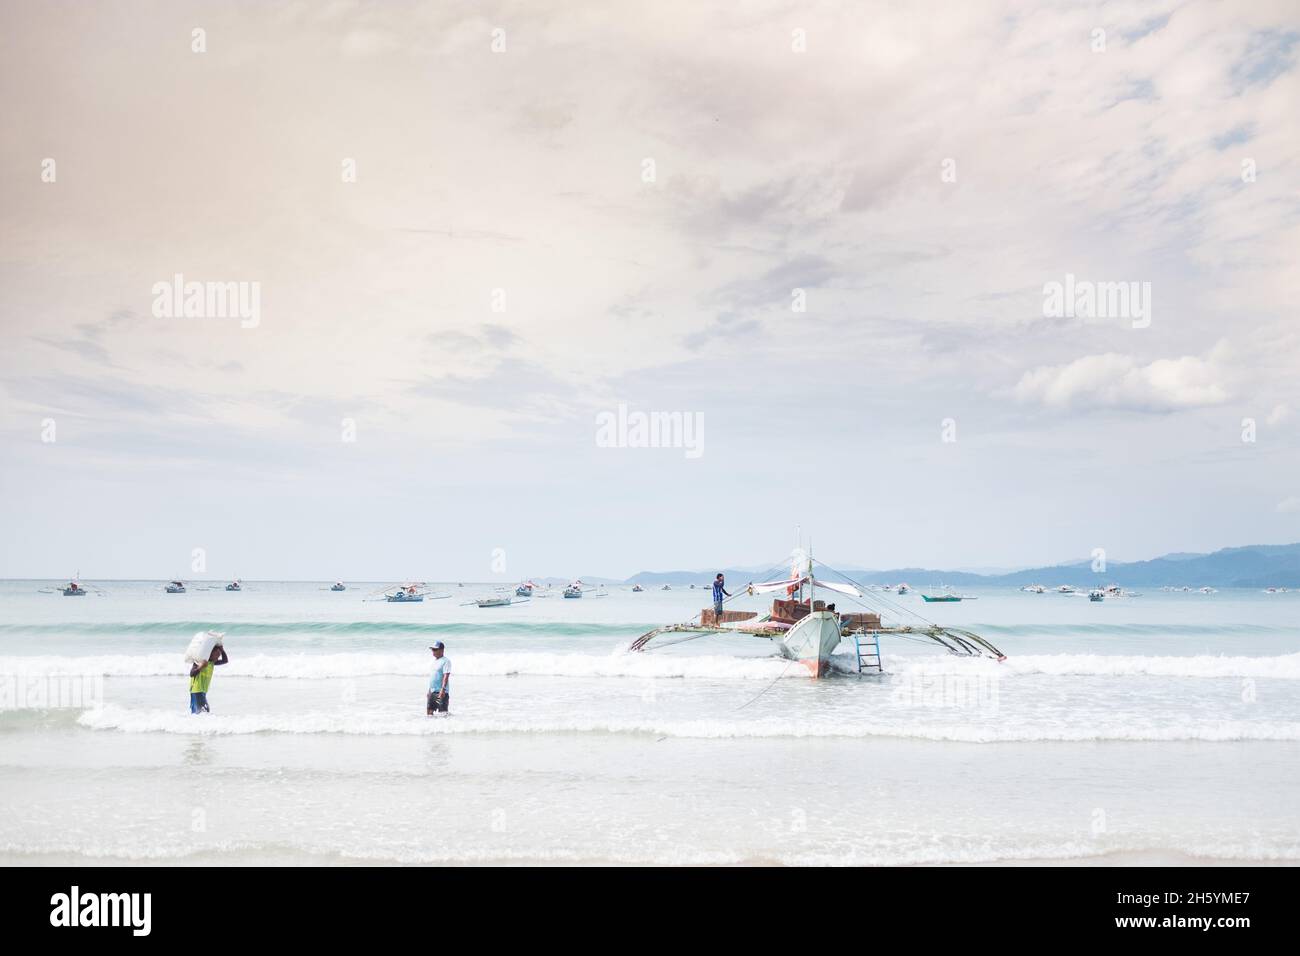 July 2017. Workers loading staples like rice and sugar onto boats for transport back to their villages. Sabong Beach, Puerto Princesa, Palawan, Philippines. Stock Photo